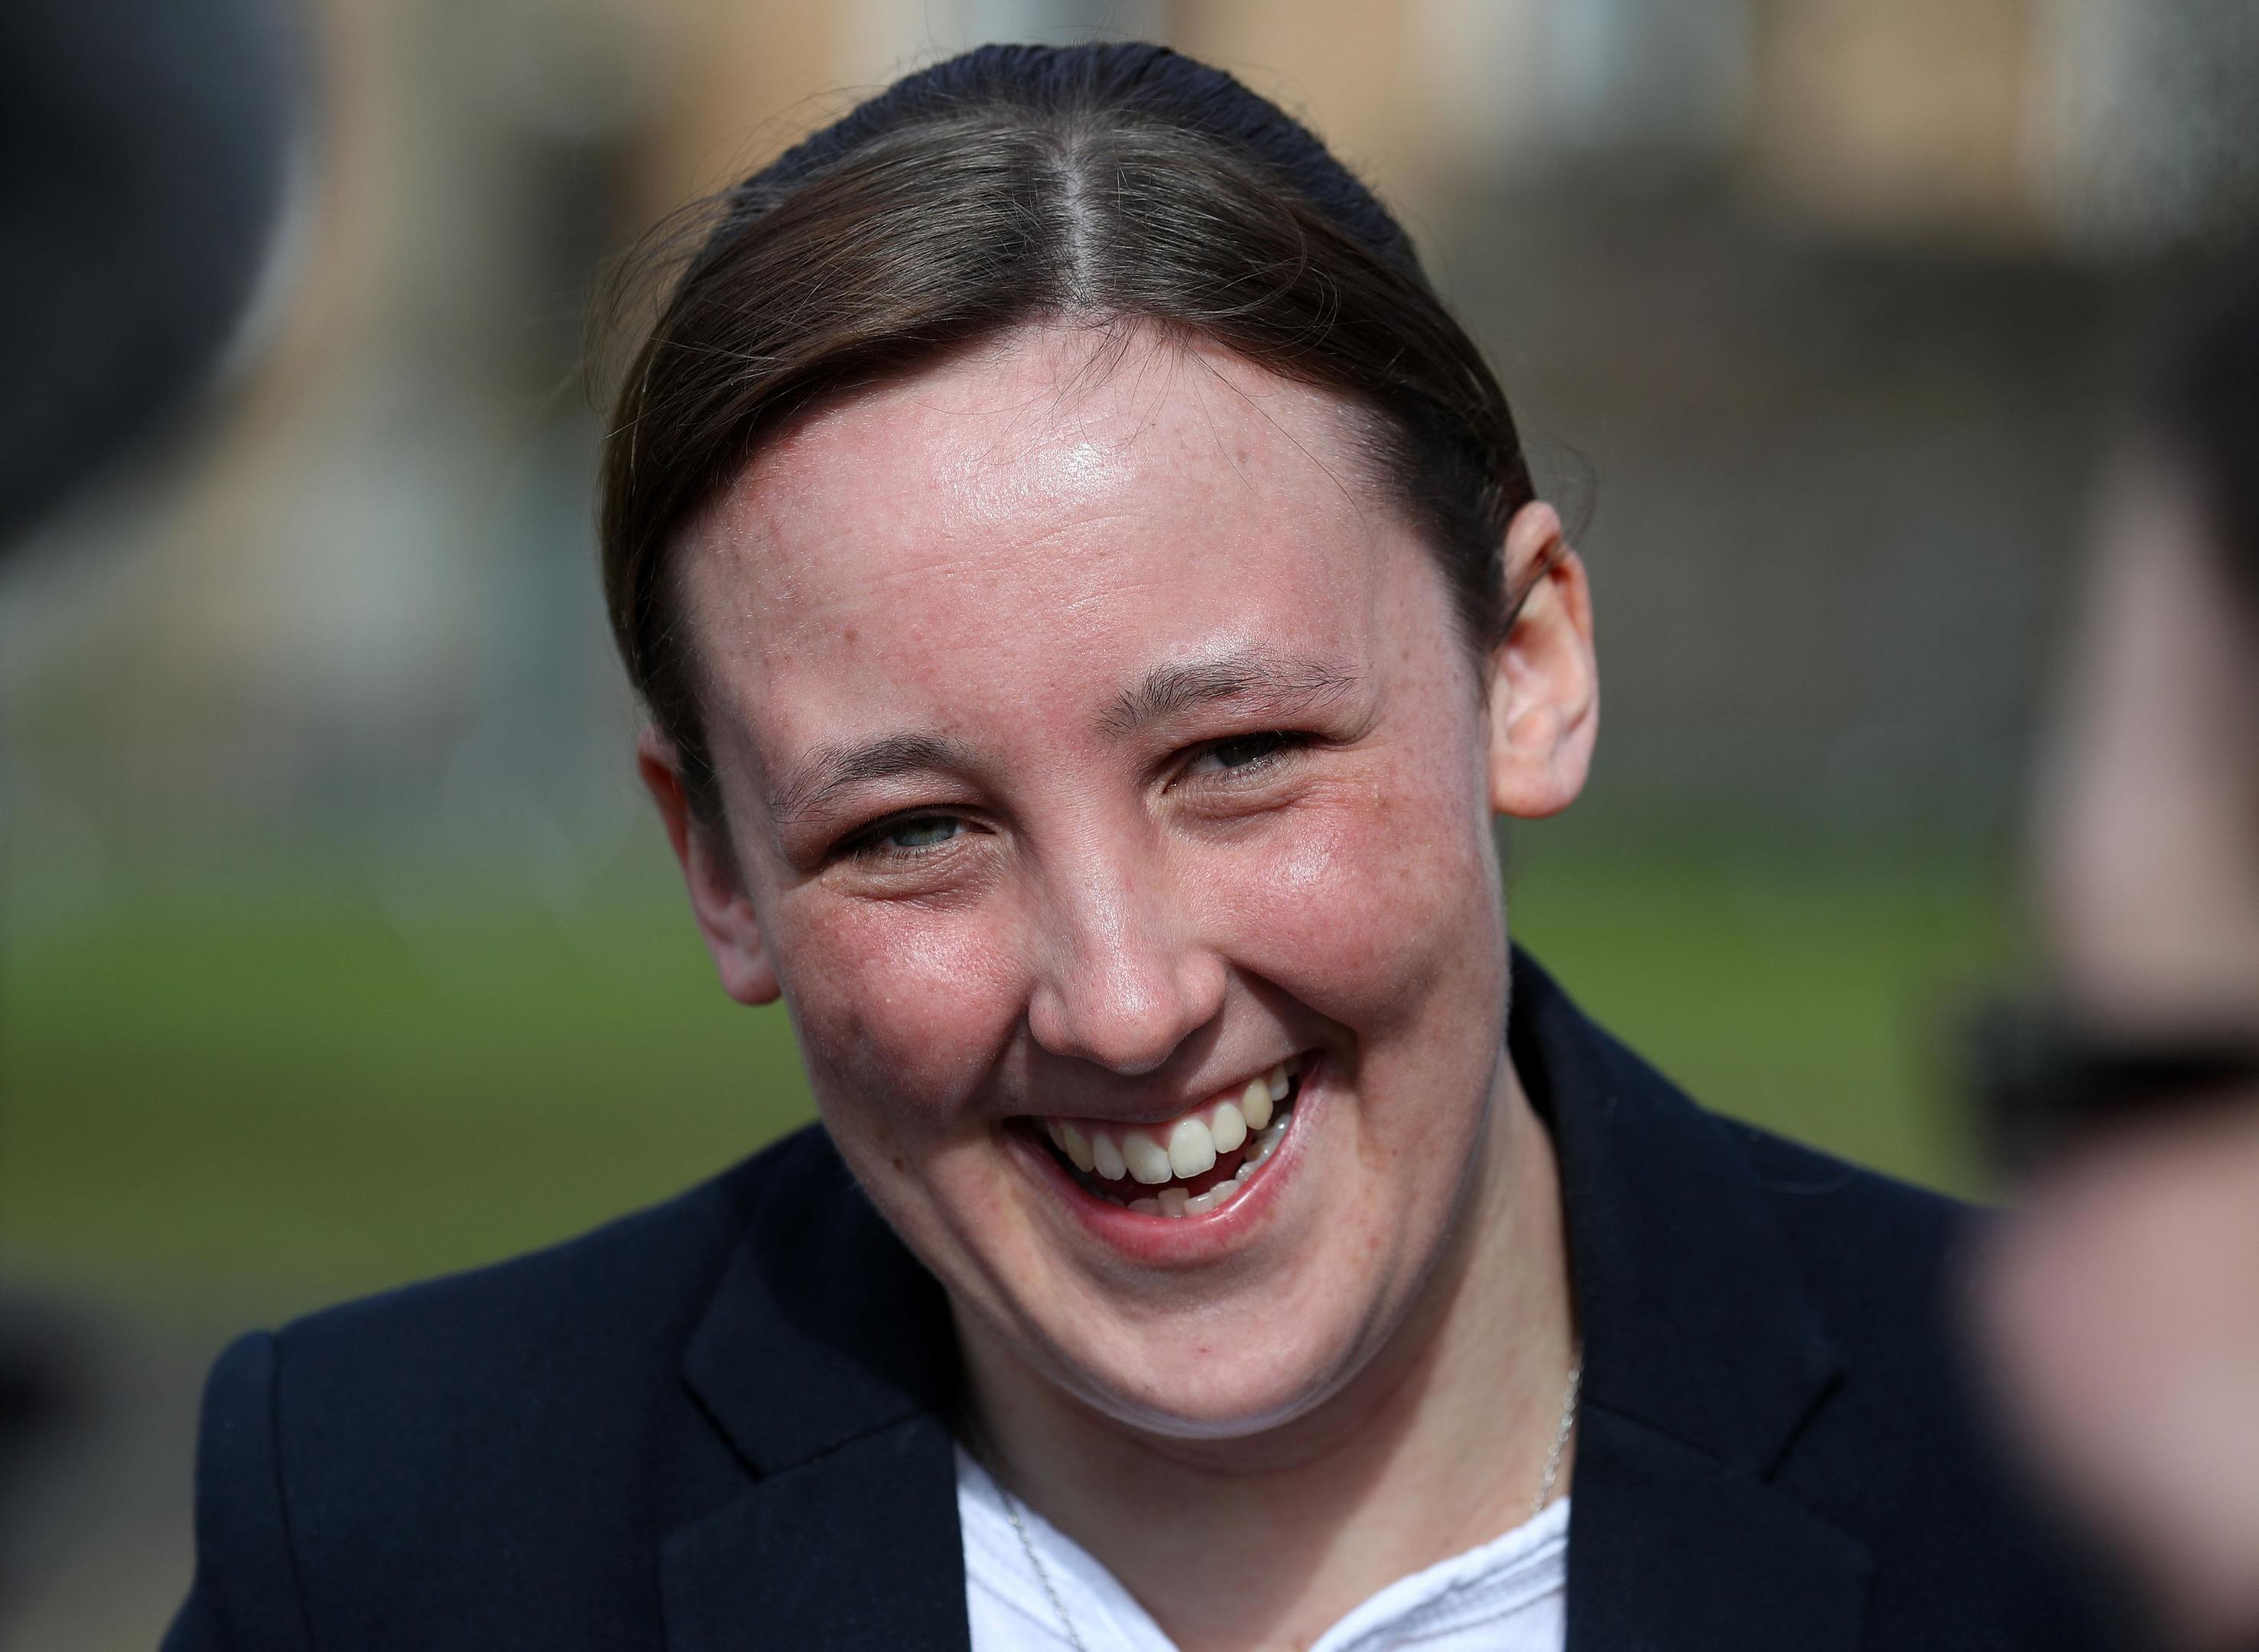 Mhairi Black has said Strictly Come Dancing should introduce same-sex dance partners (Andrew Milligan/PA)